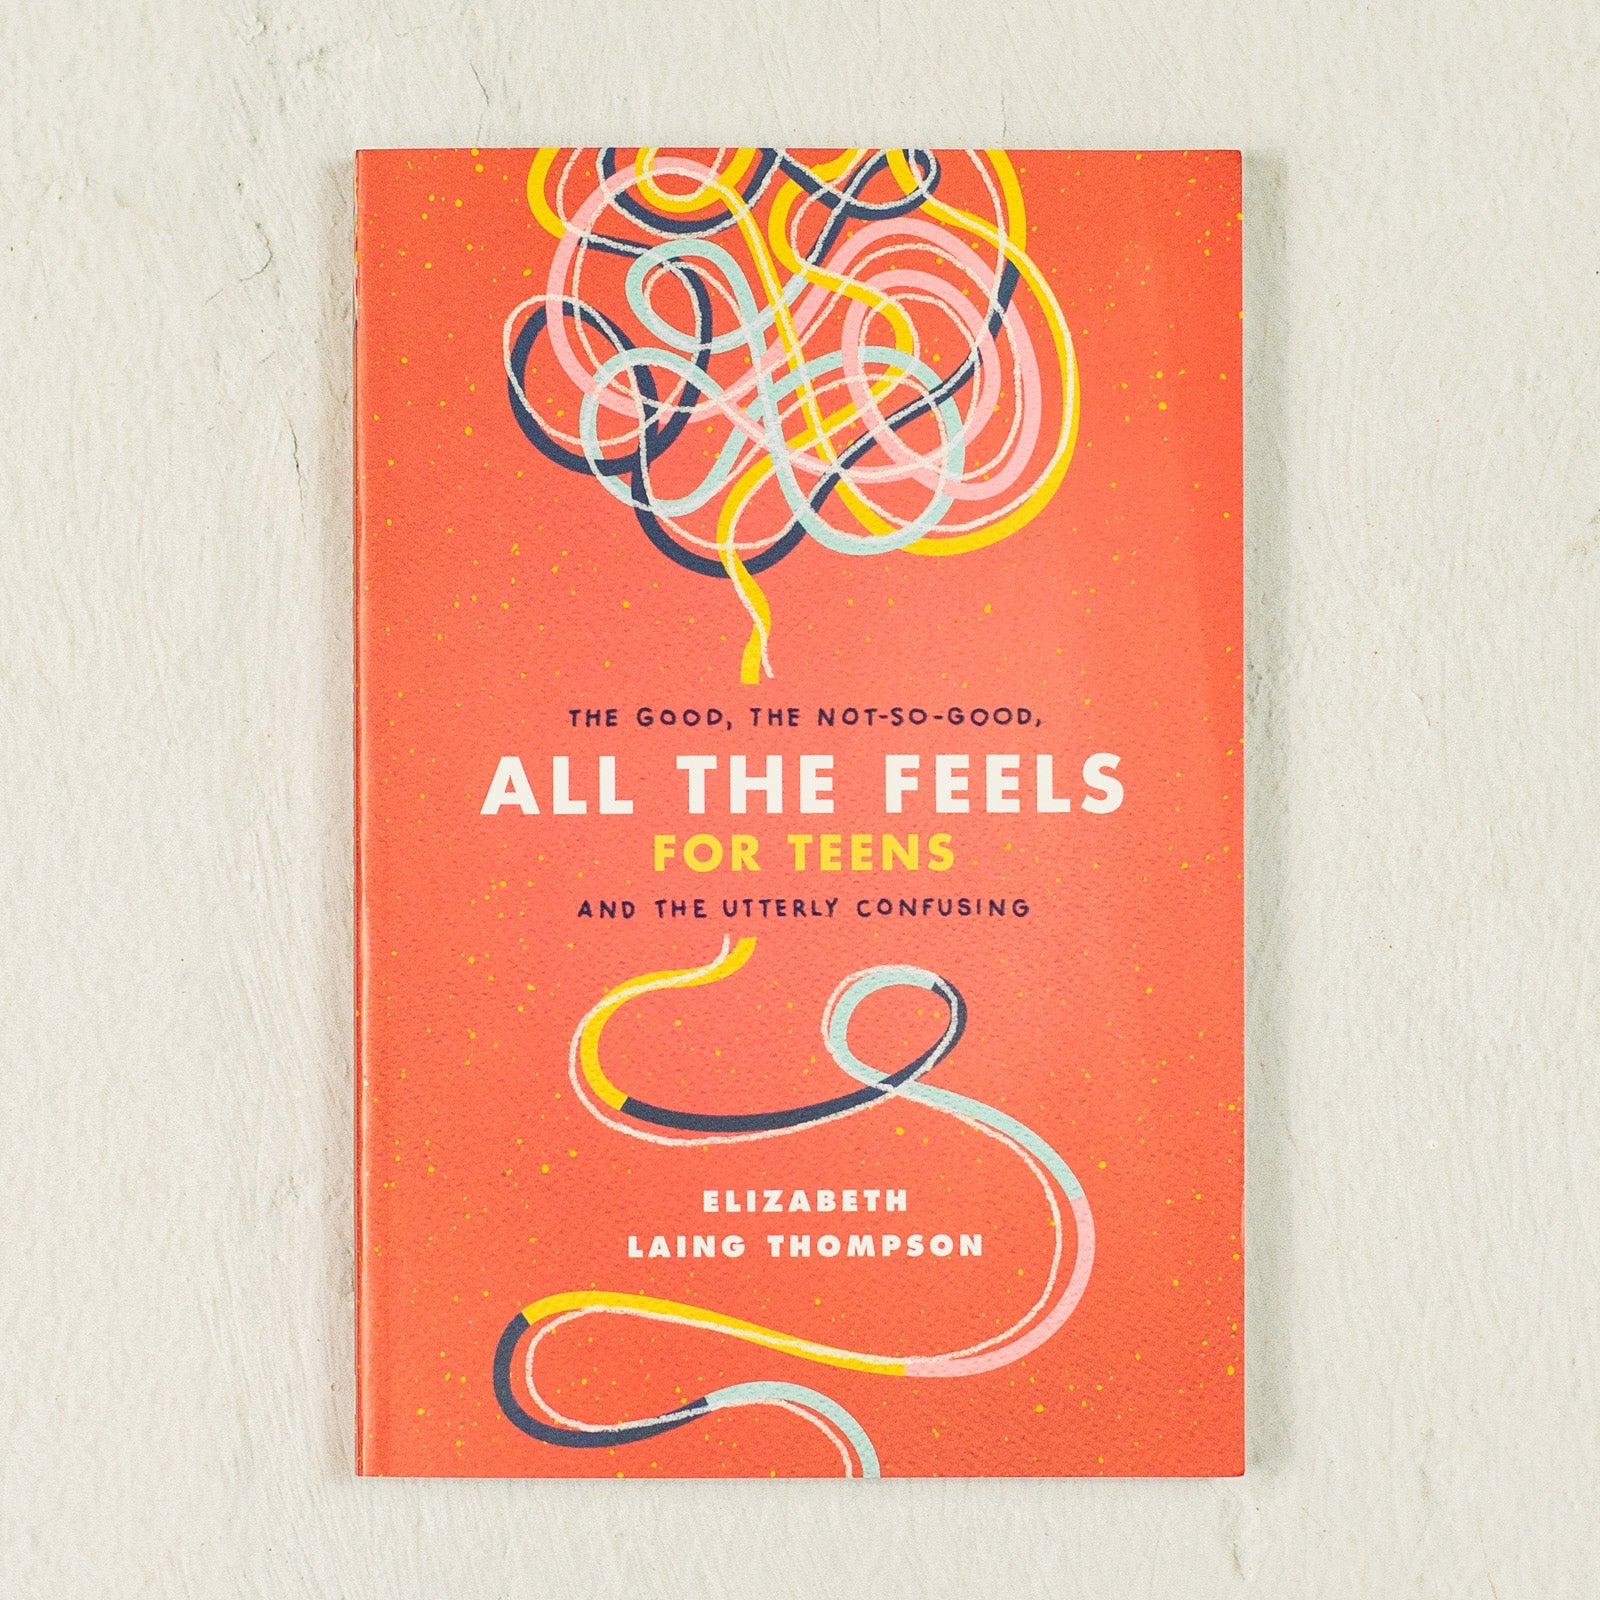 All the Feels for Teens: The Good, the Not-So-Good, and the Utterly Confusing